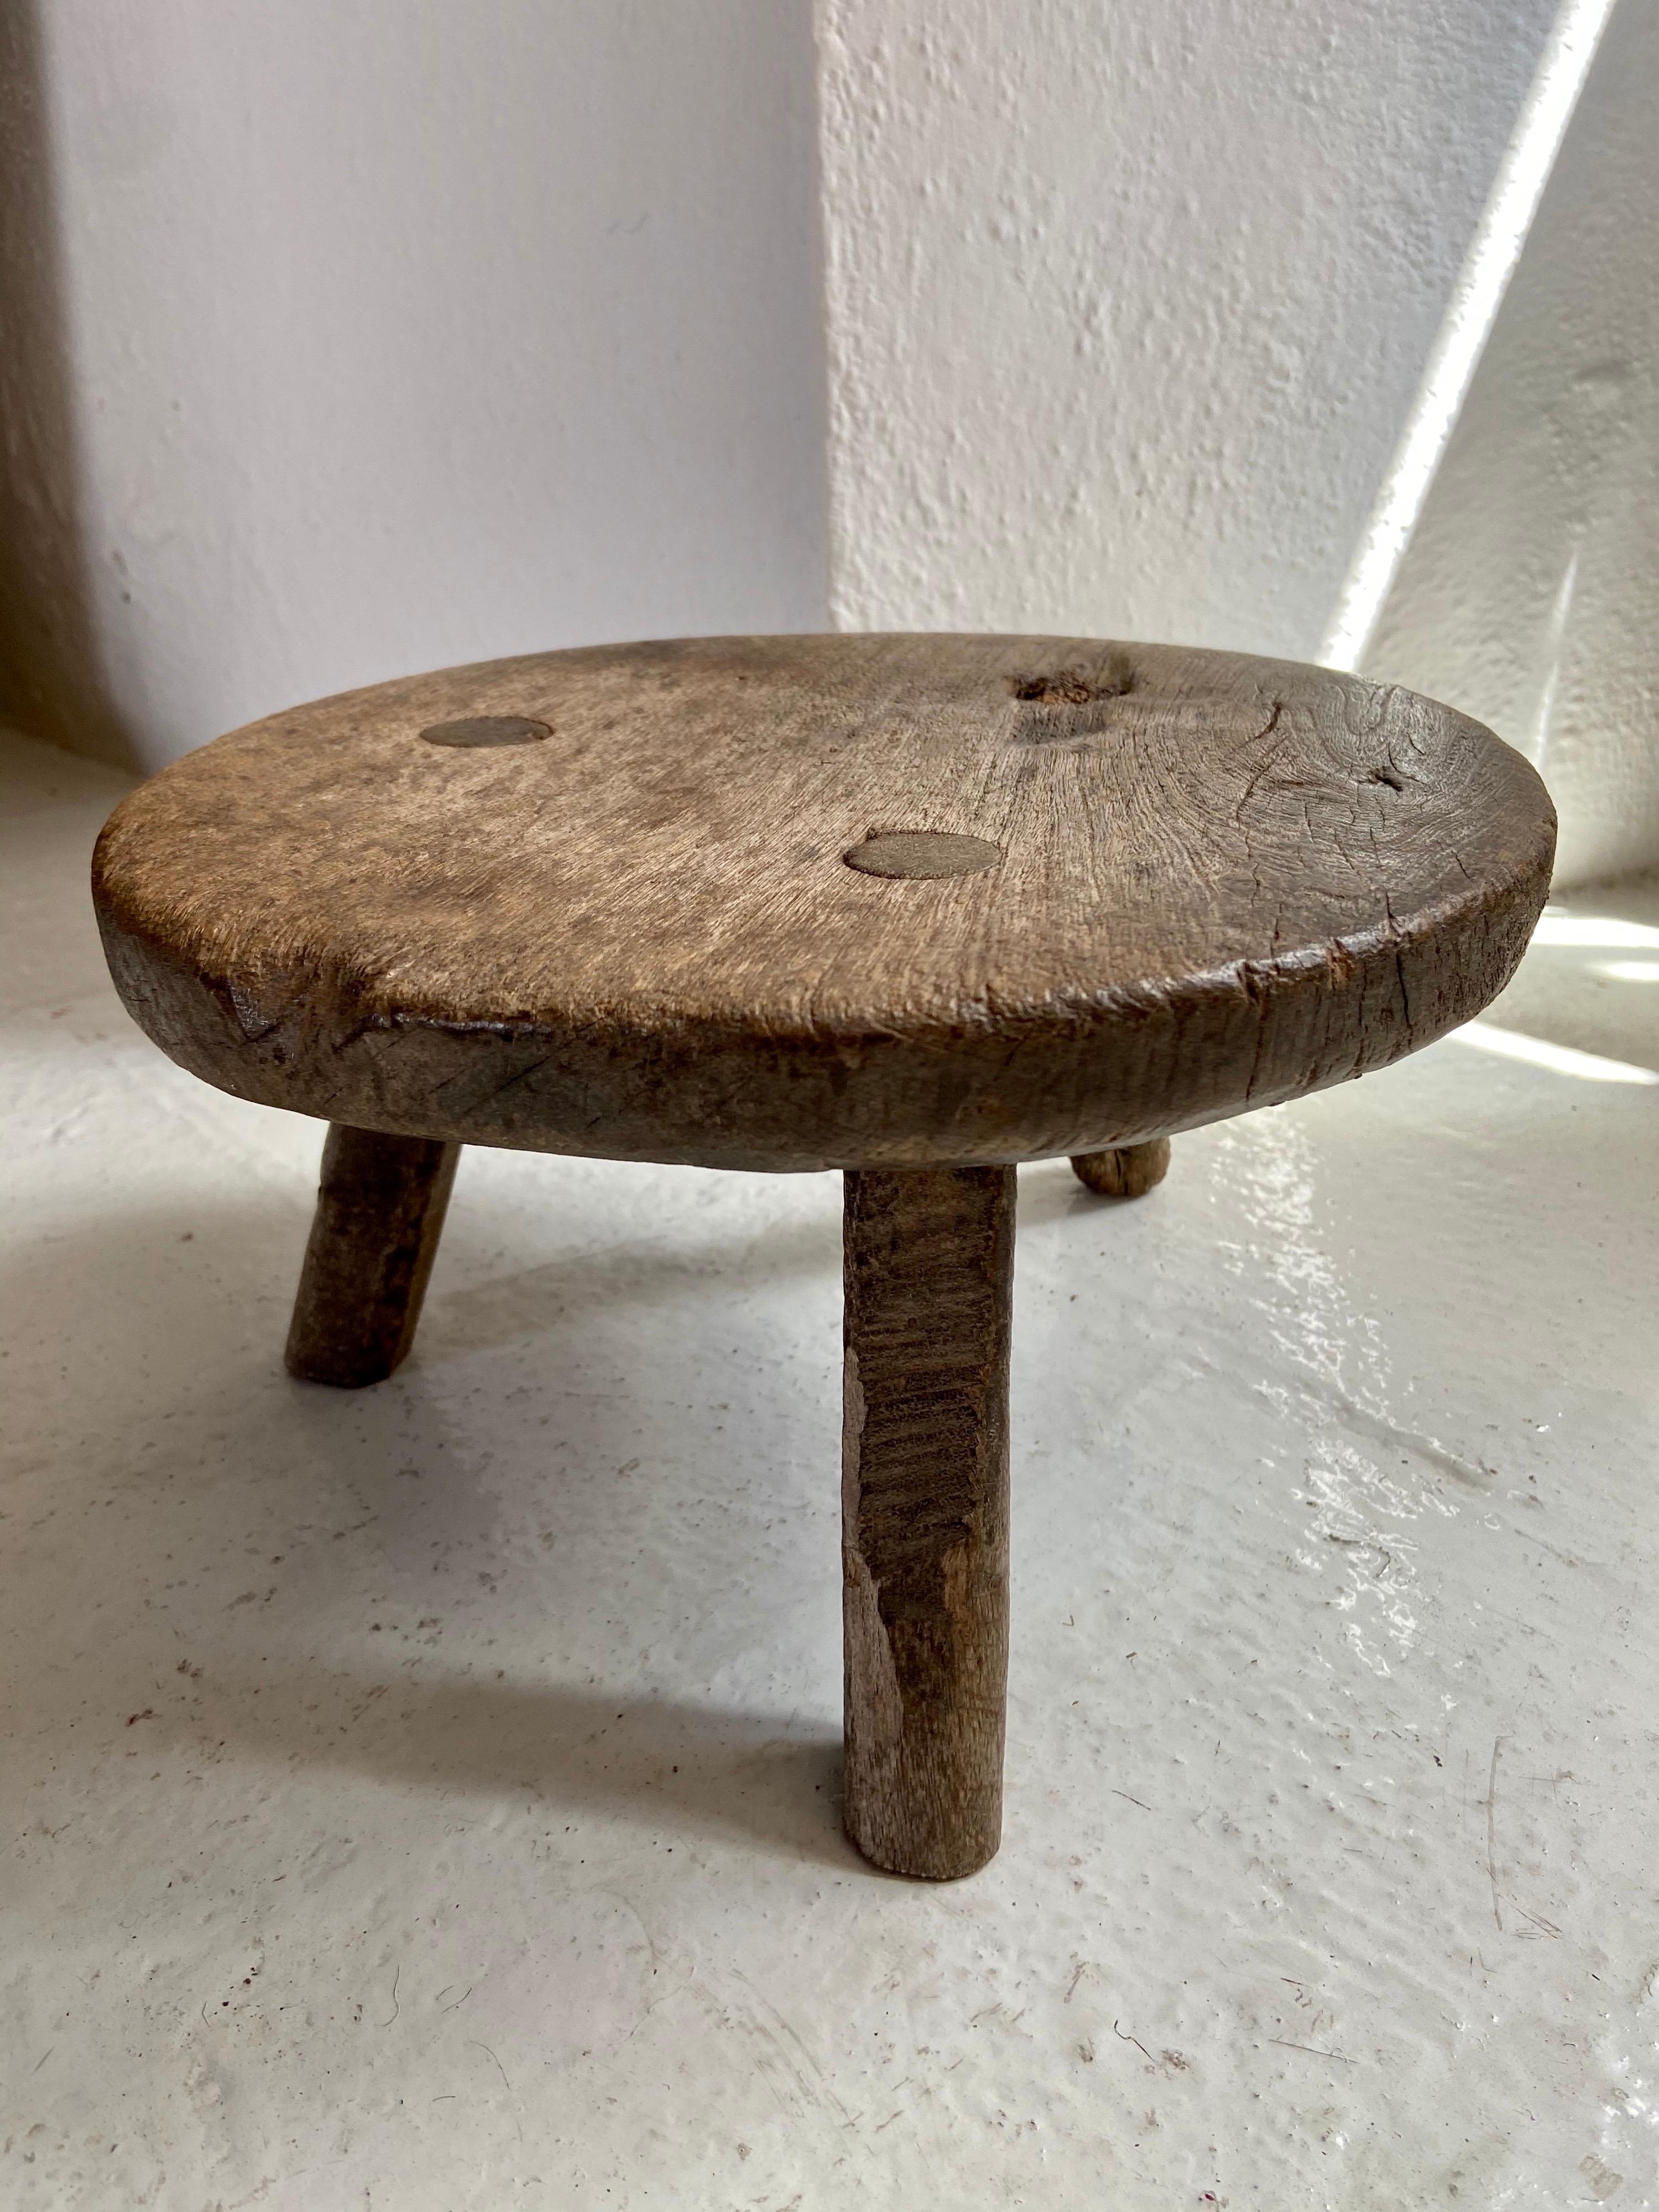 Hardwood Mid-20th Century Mesquite Stool from Mexico